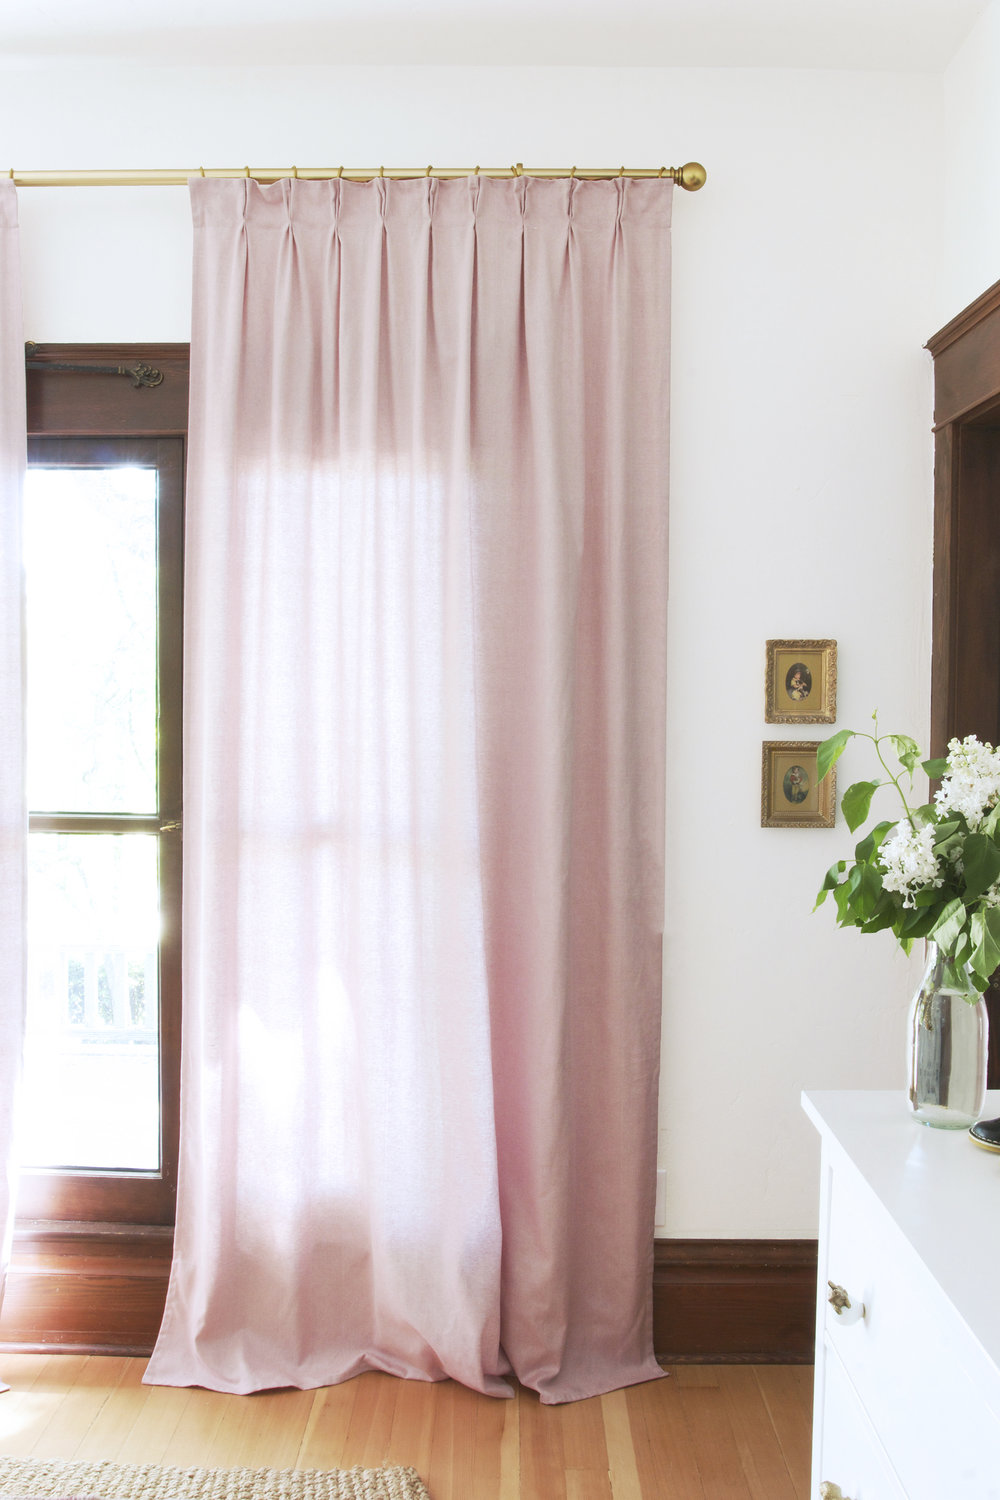 The+Grit+and+Polish+ +IKEA+TIBAST+curtains+in+pink